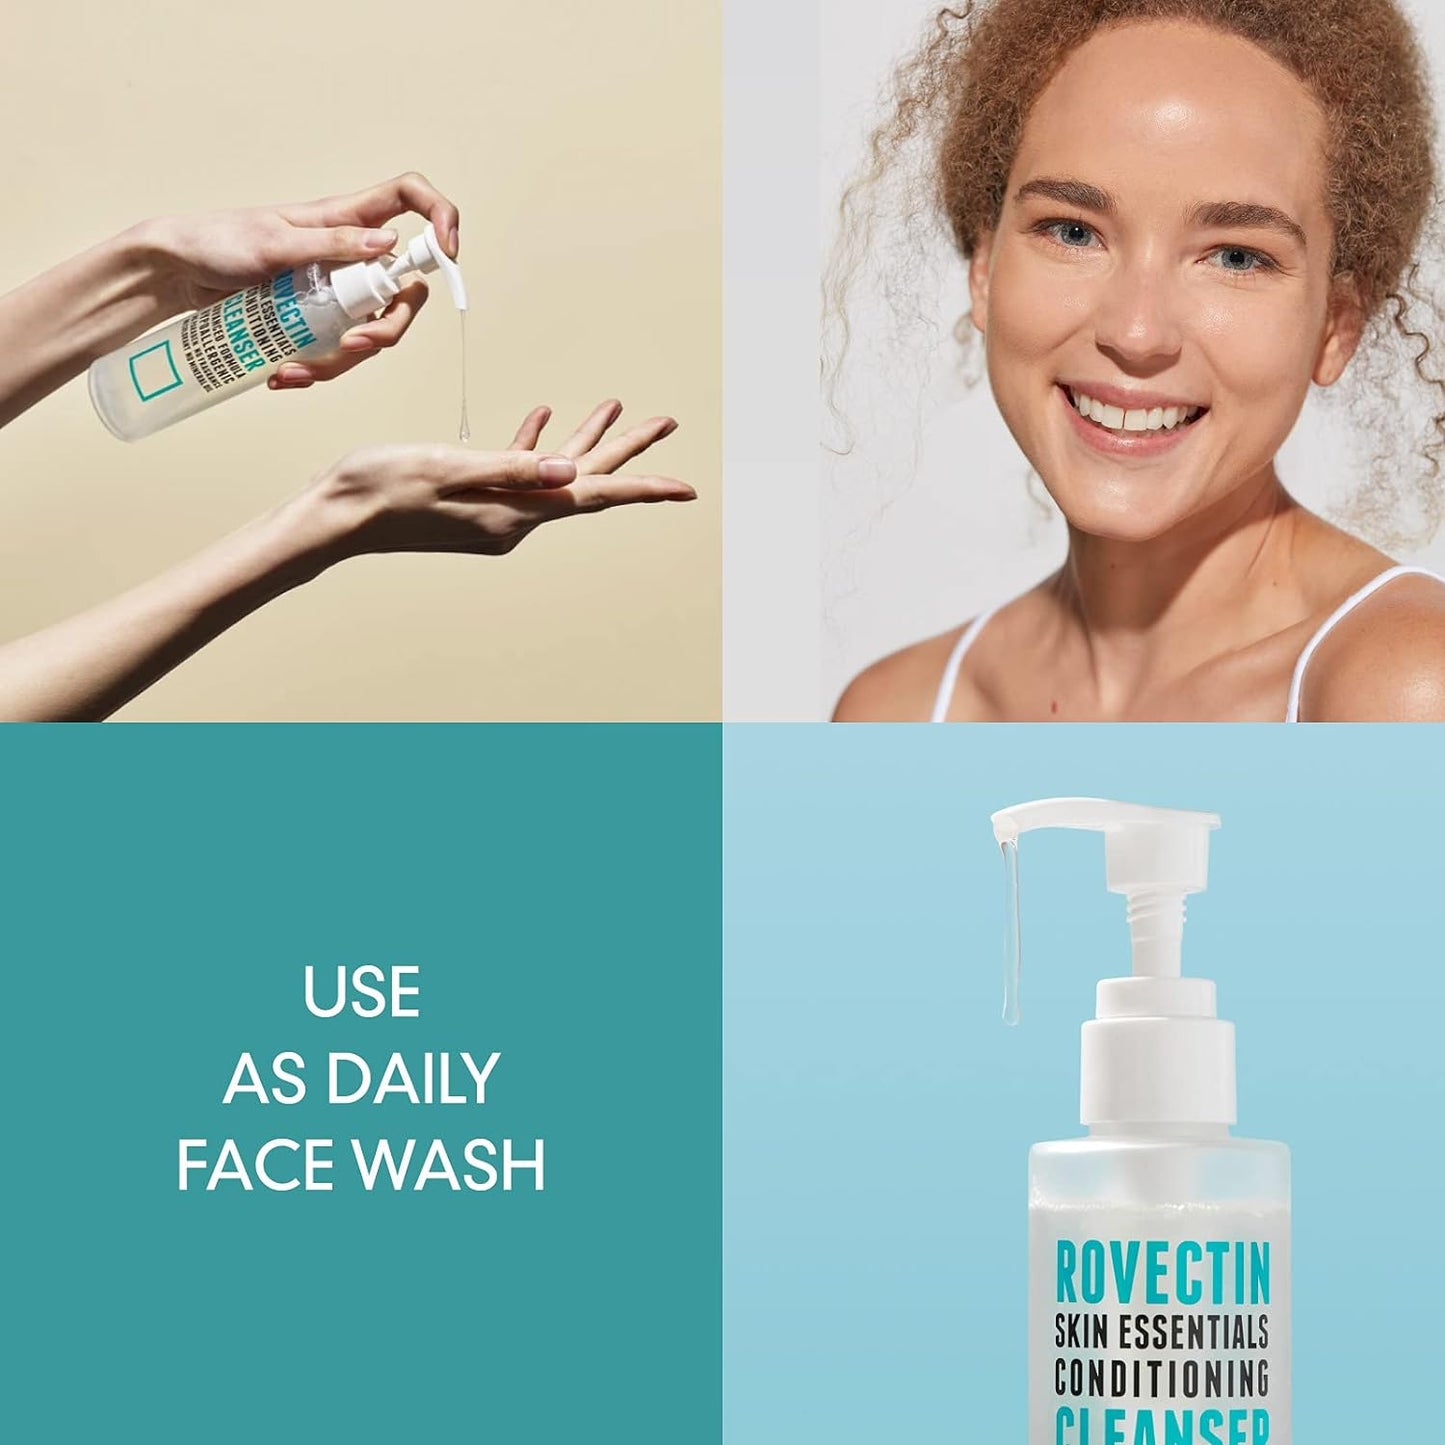 ROVECTIN Aqua Conditioning Cleanser from Rovectin